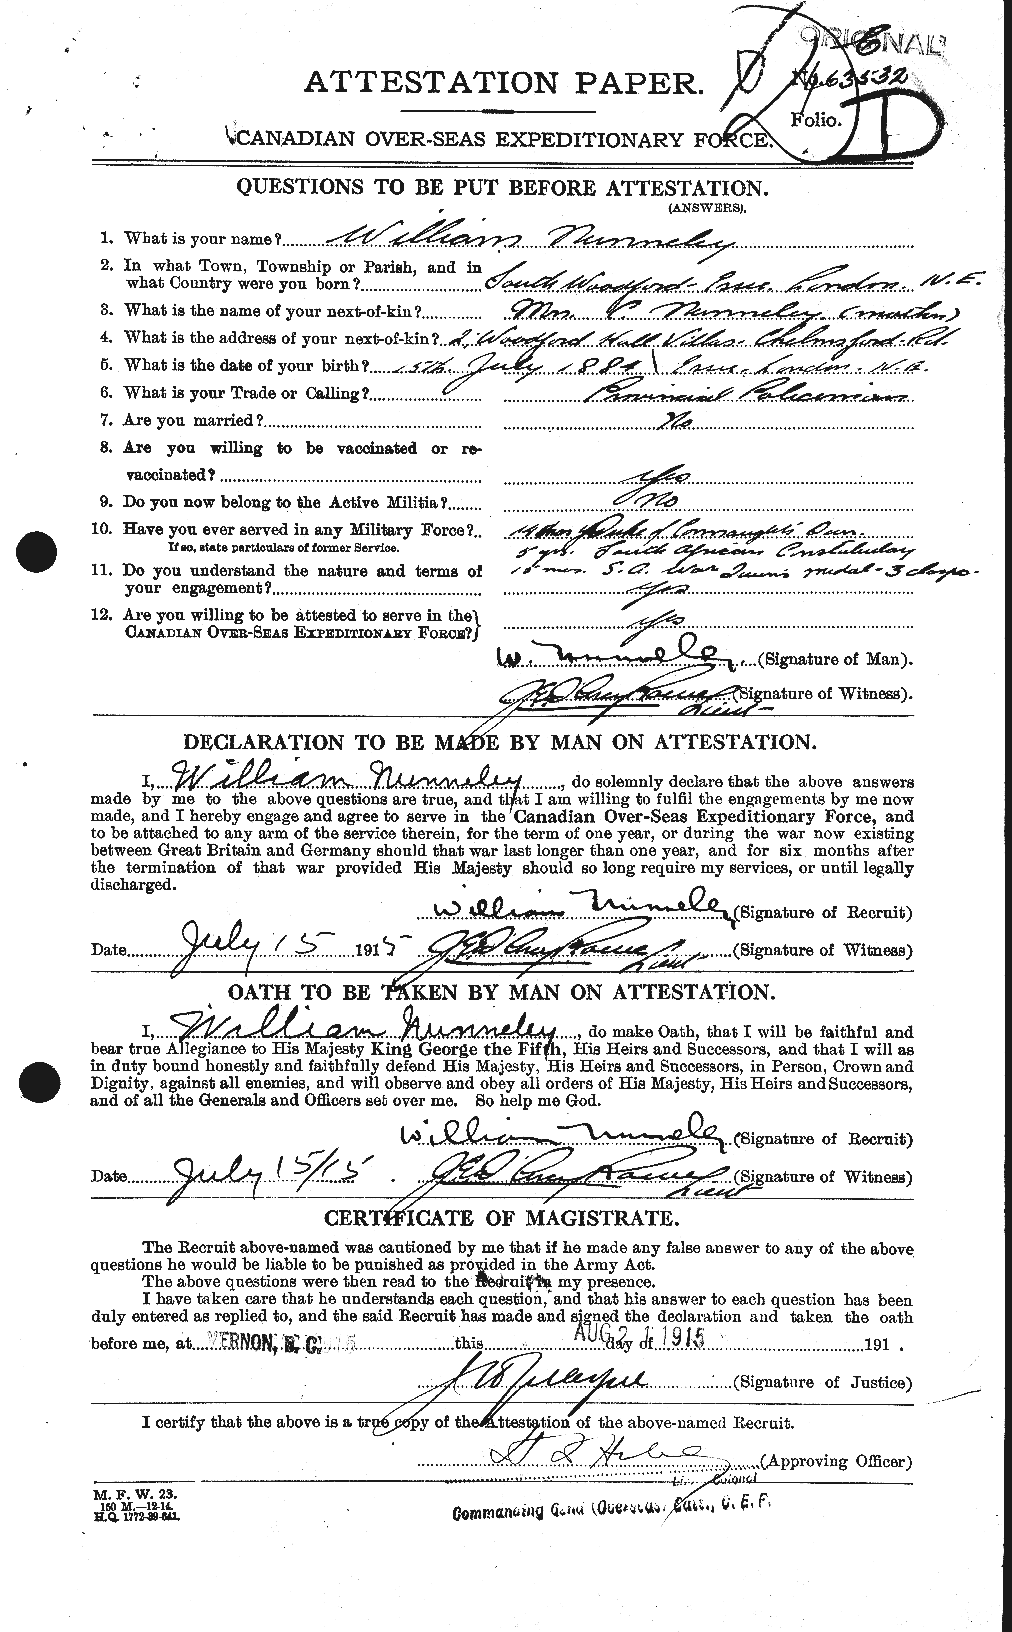 Personnel Records of the First World War - CEF 553341a